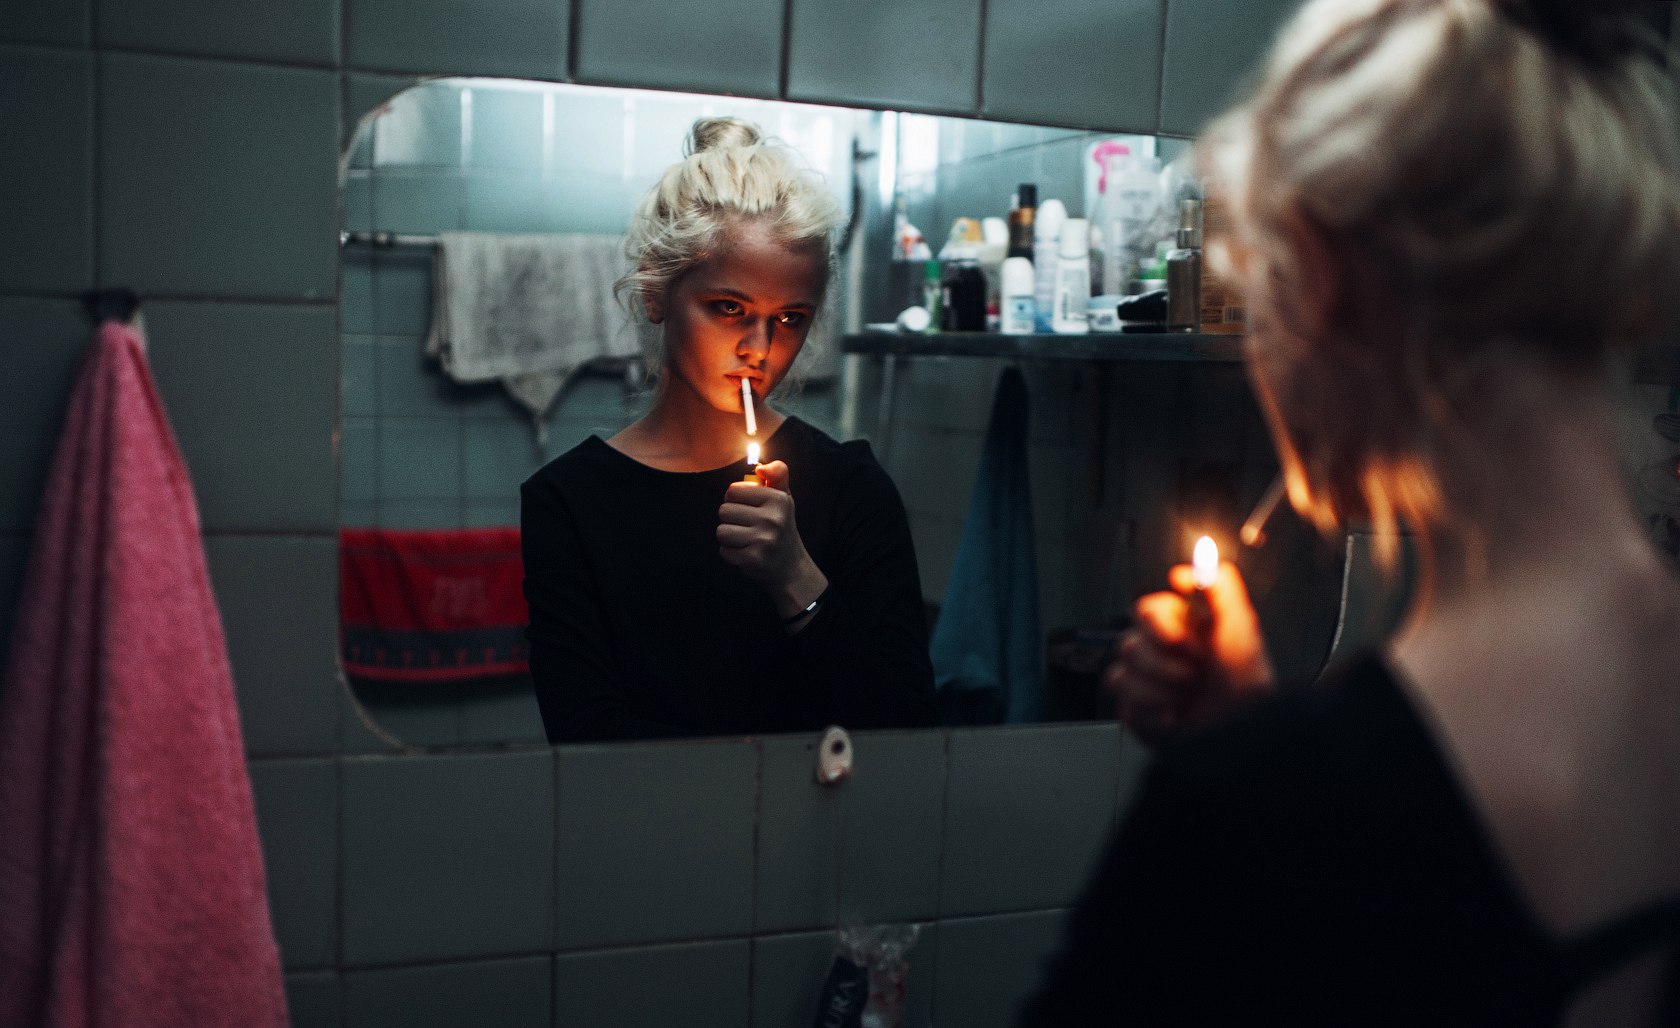 People 1680x1028 photography model women women indoors depth of field blonde red lipstick face black clothing smoking bathroom mirror cigarettes fire lighter reflection